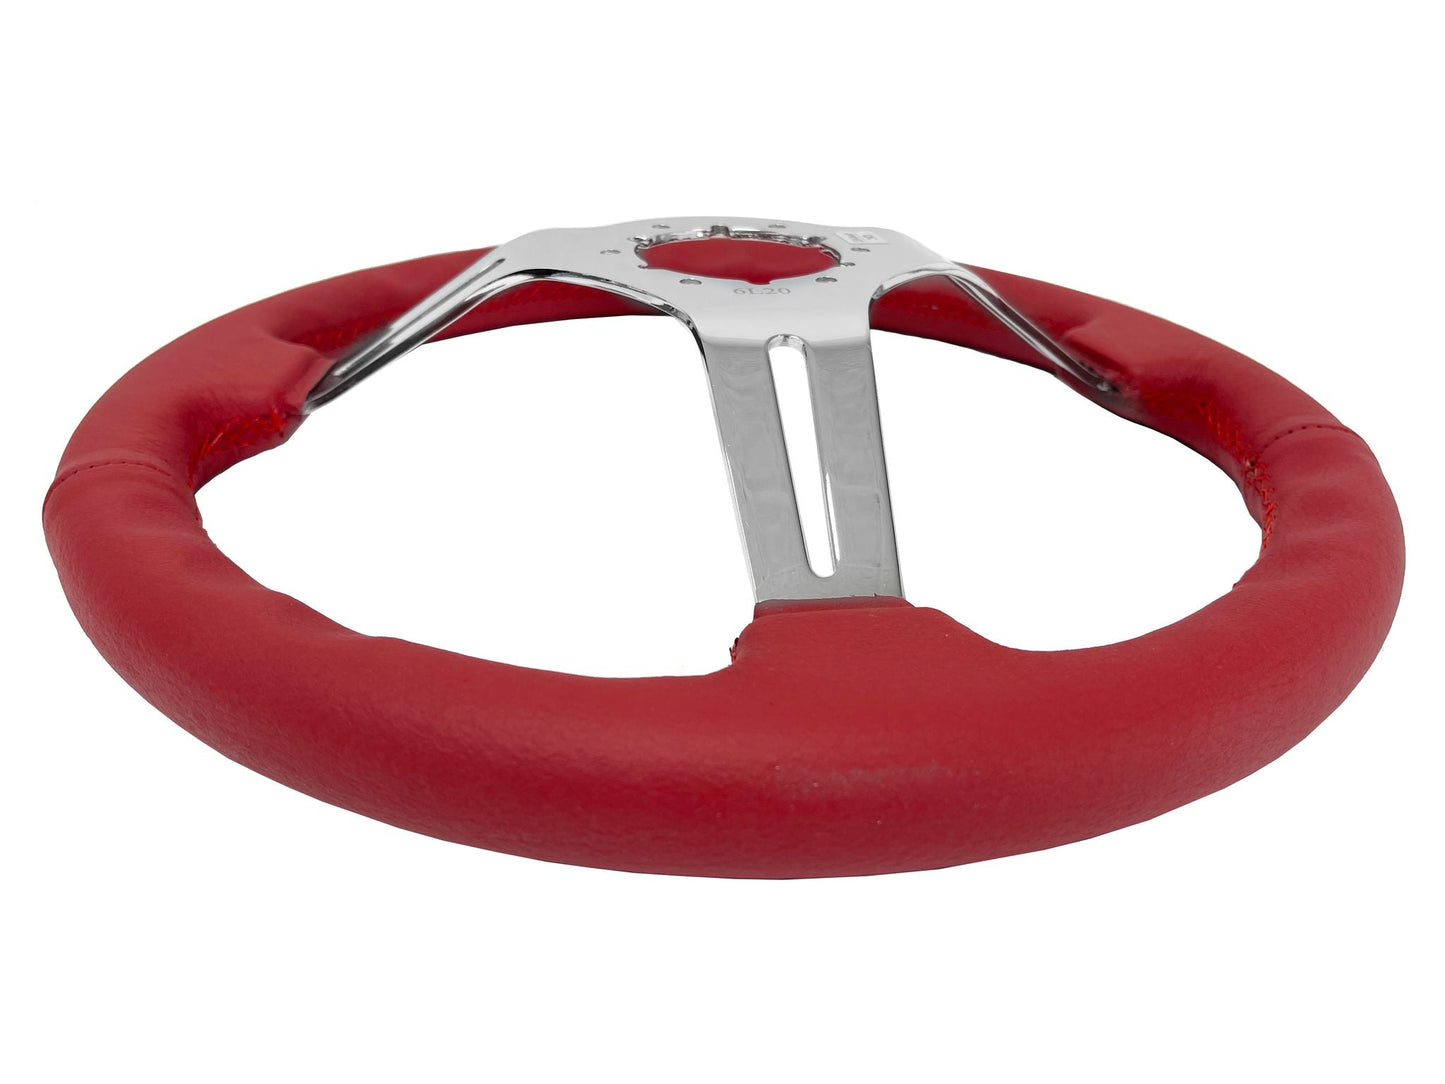 1970-76 Ford Torino Steering Wheel Kit | Red Leather | ST3012RED